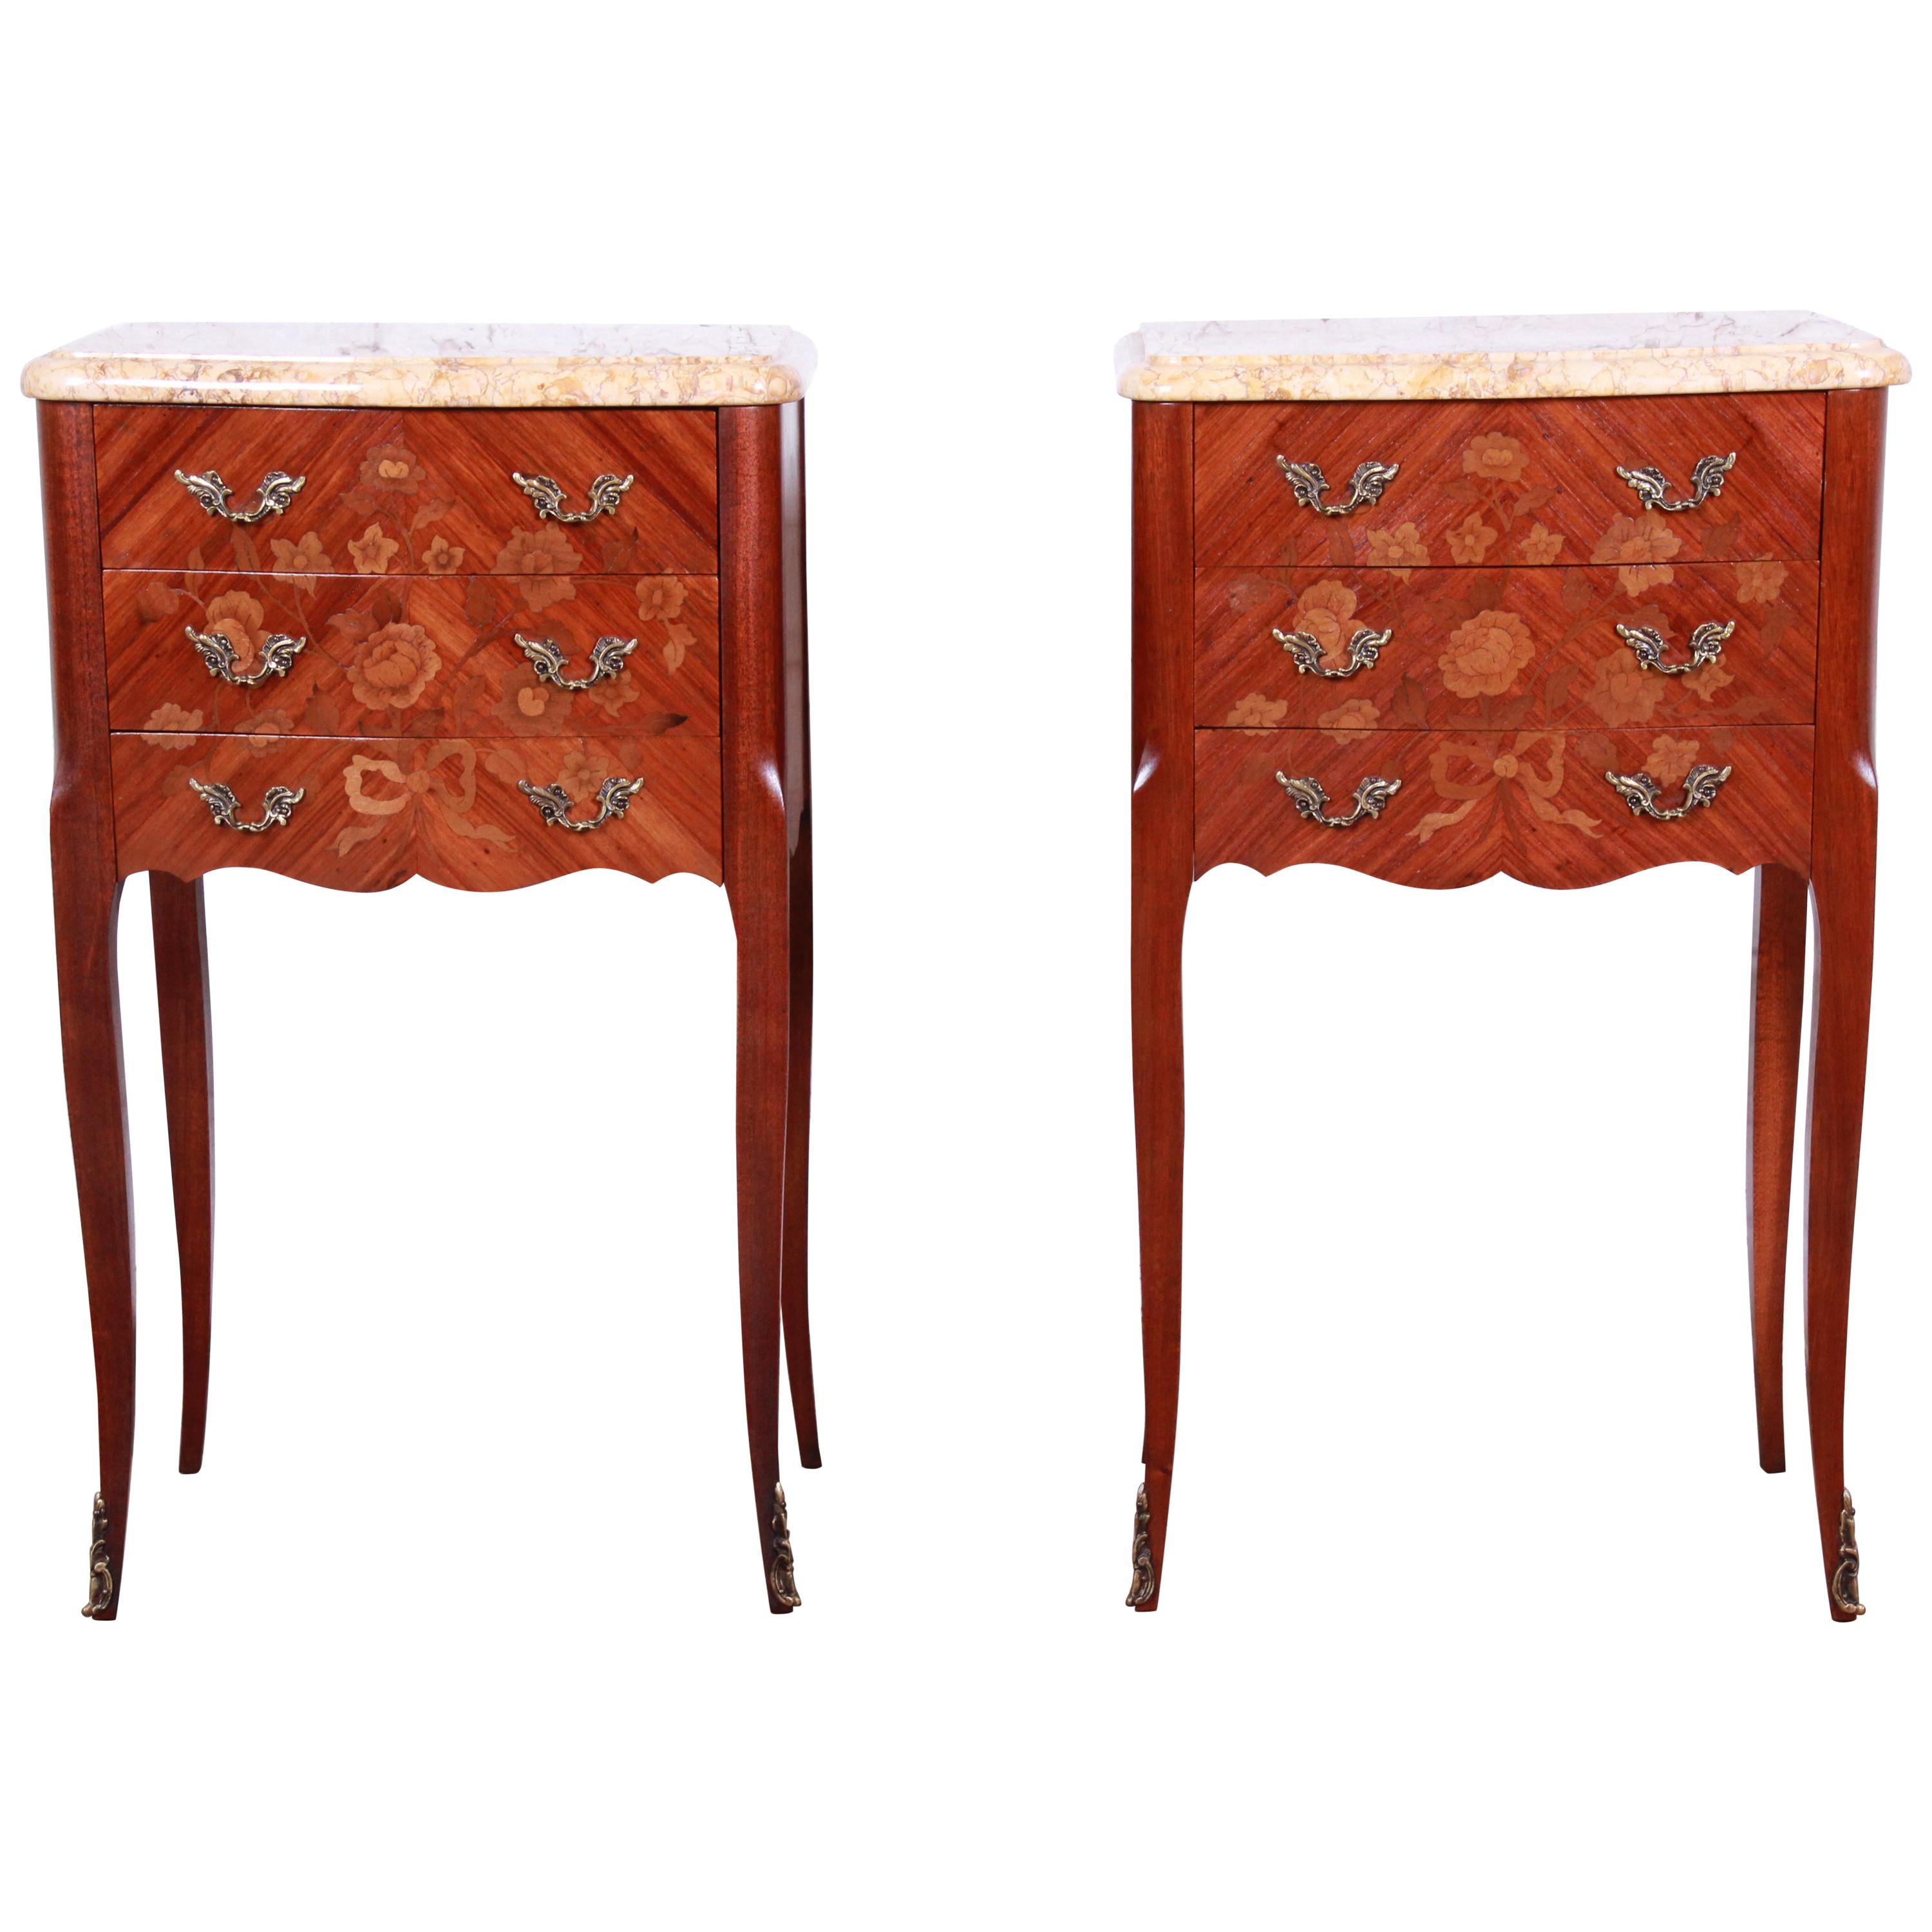 Antique French Louis XV Style Inlaid Marquetry Marble Top Nightstands, Pair